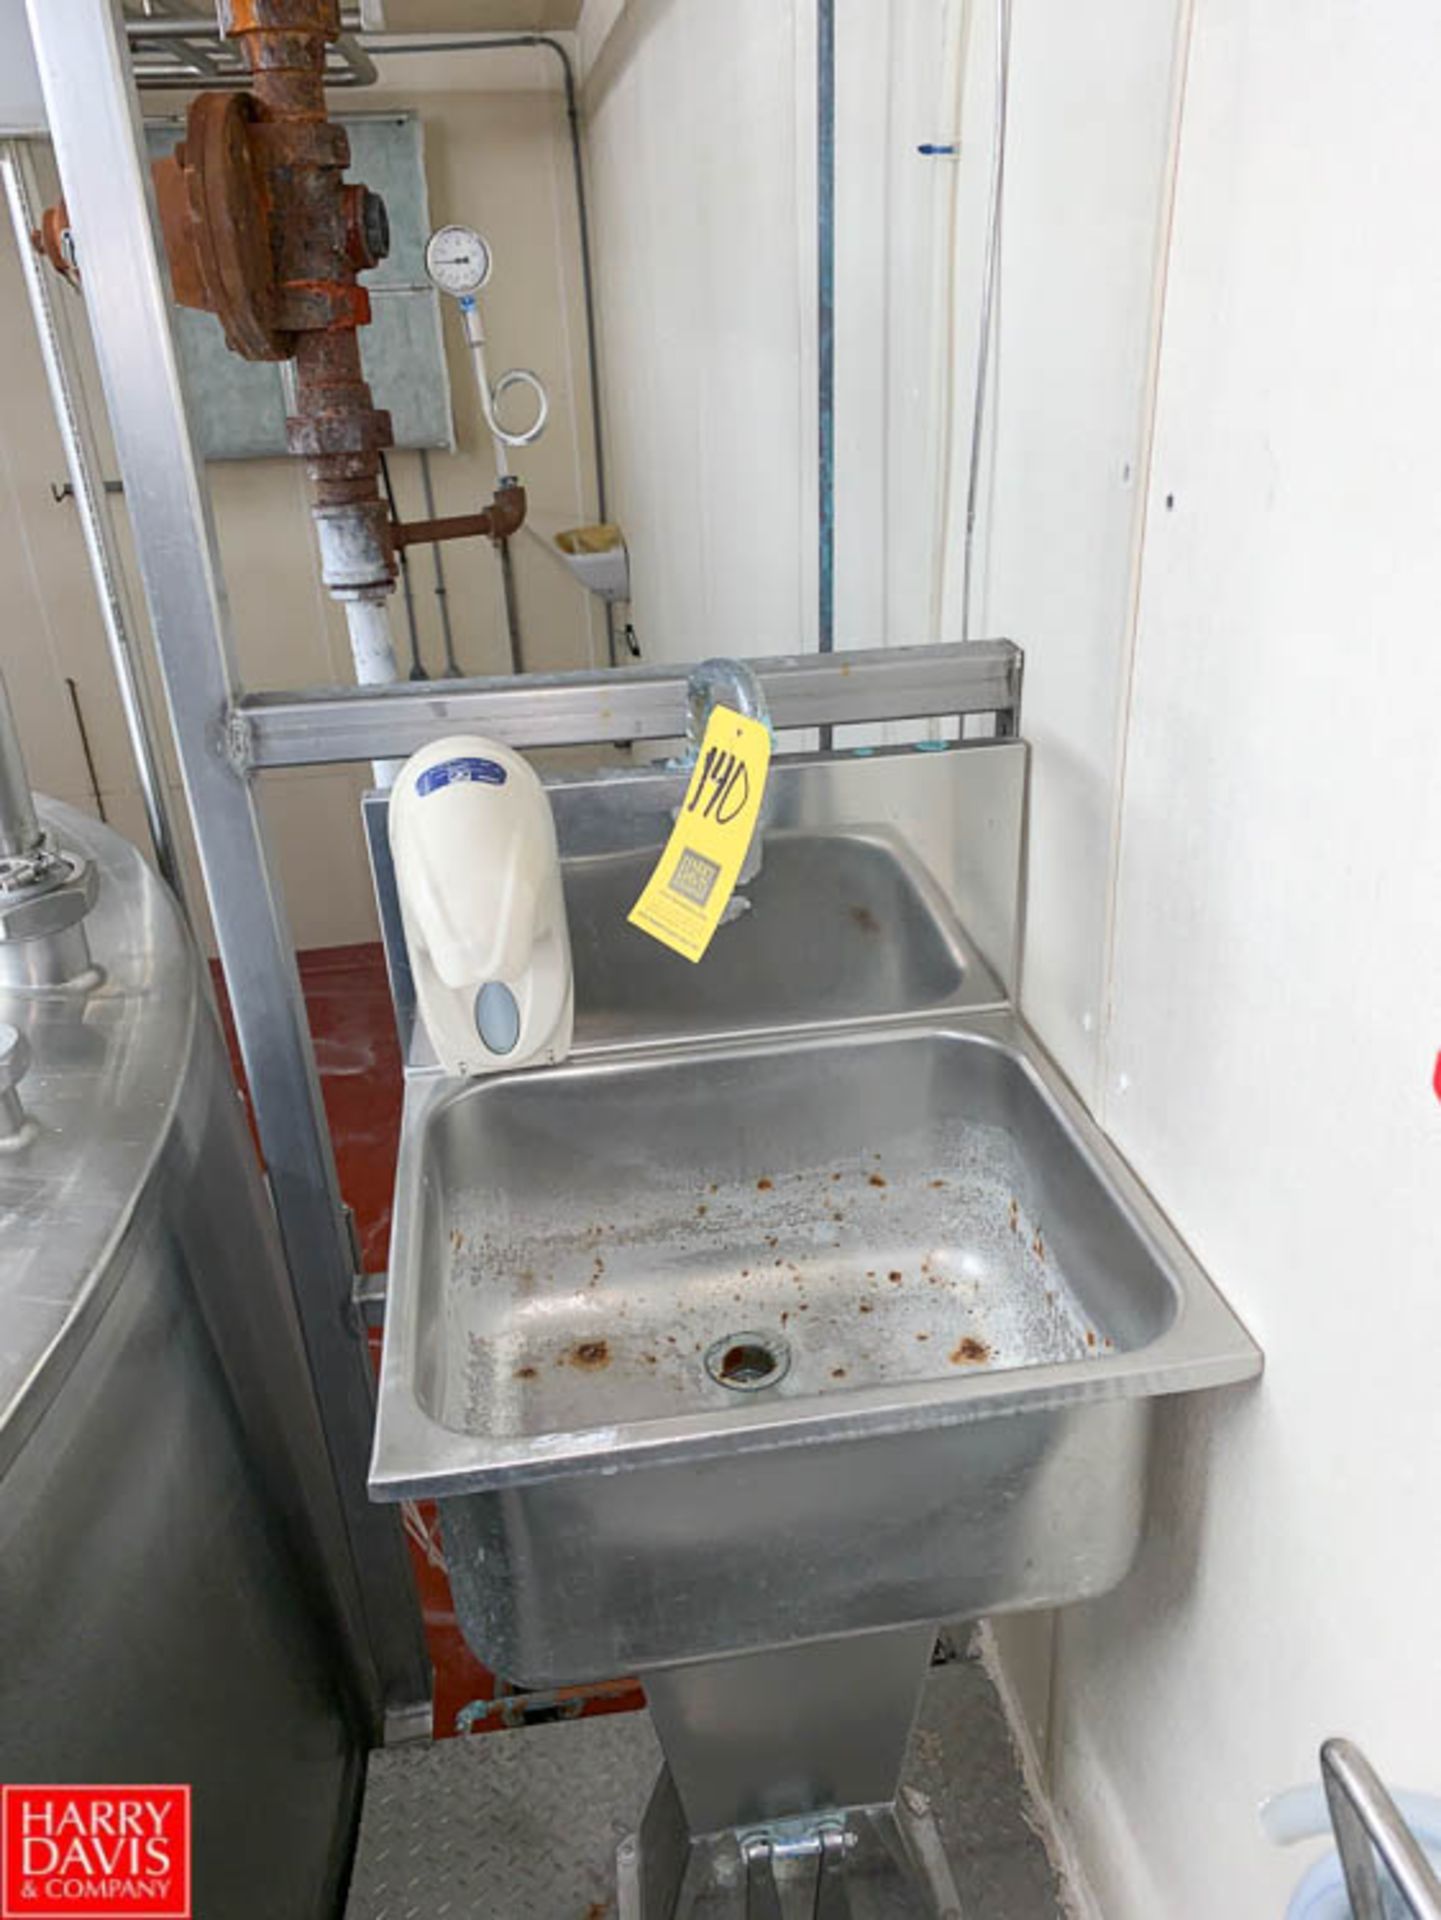 S/S Wash Sink, wth Foot Controls - Rigging Fee: $ 25